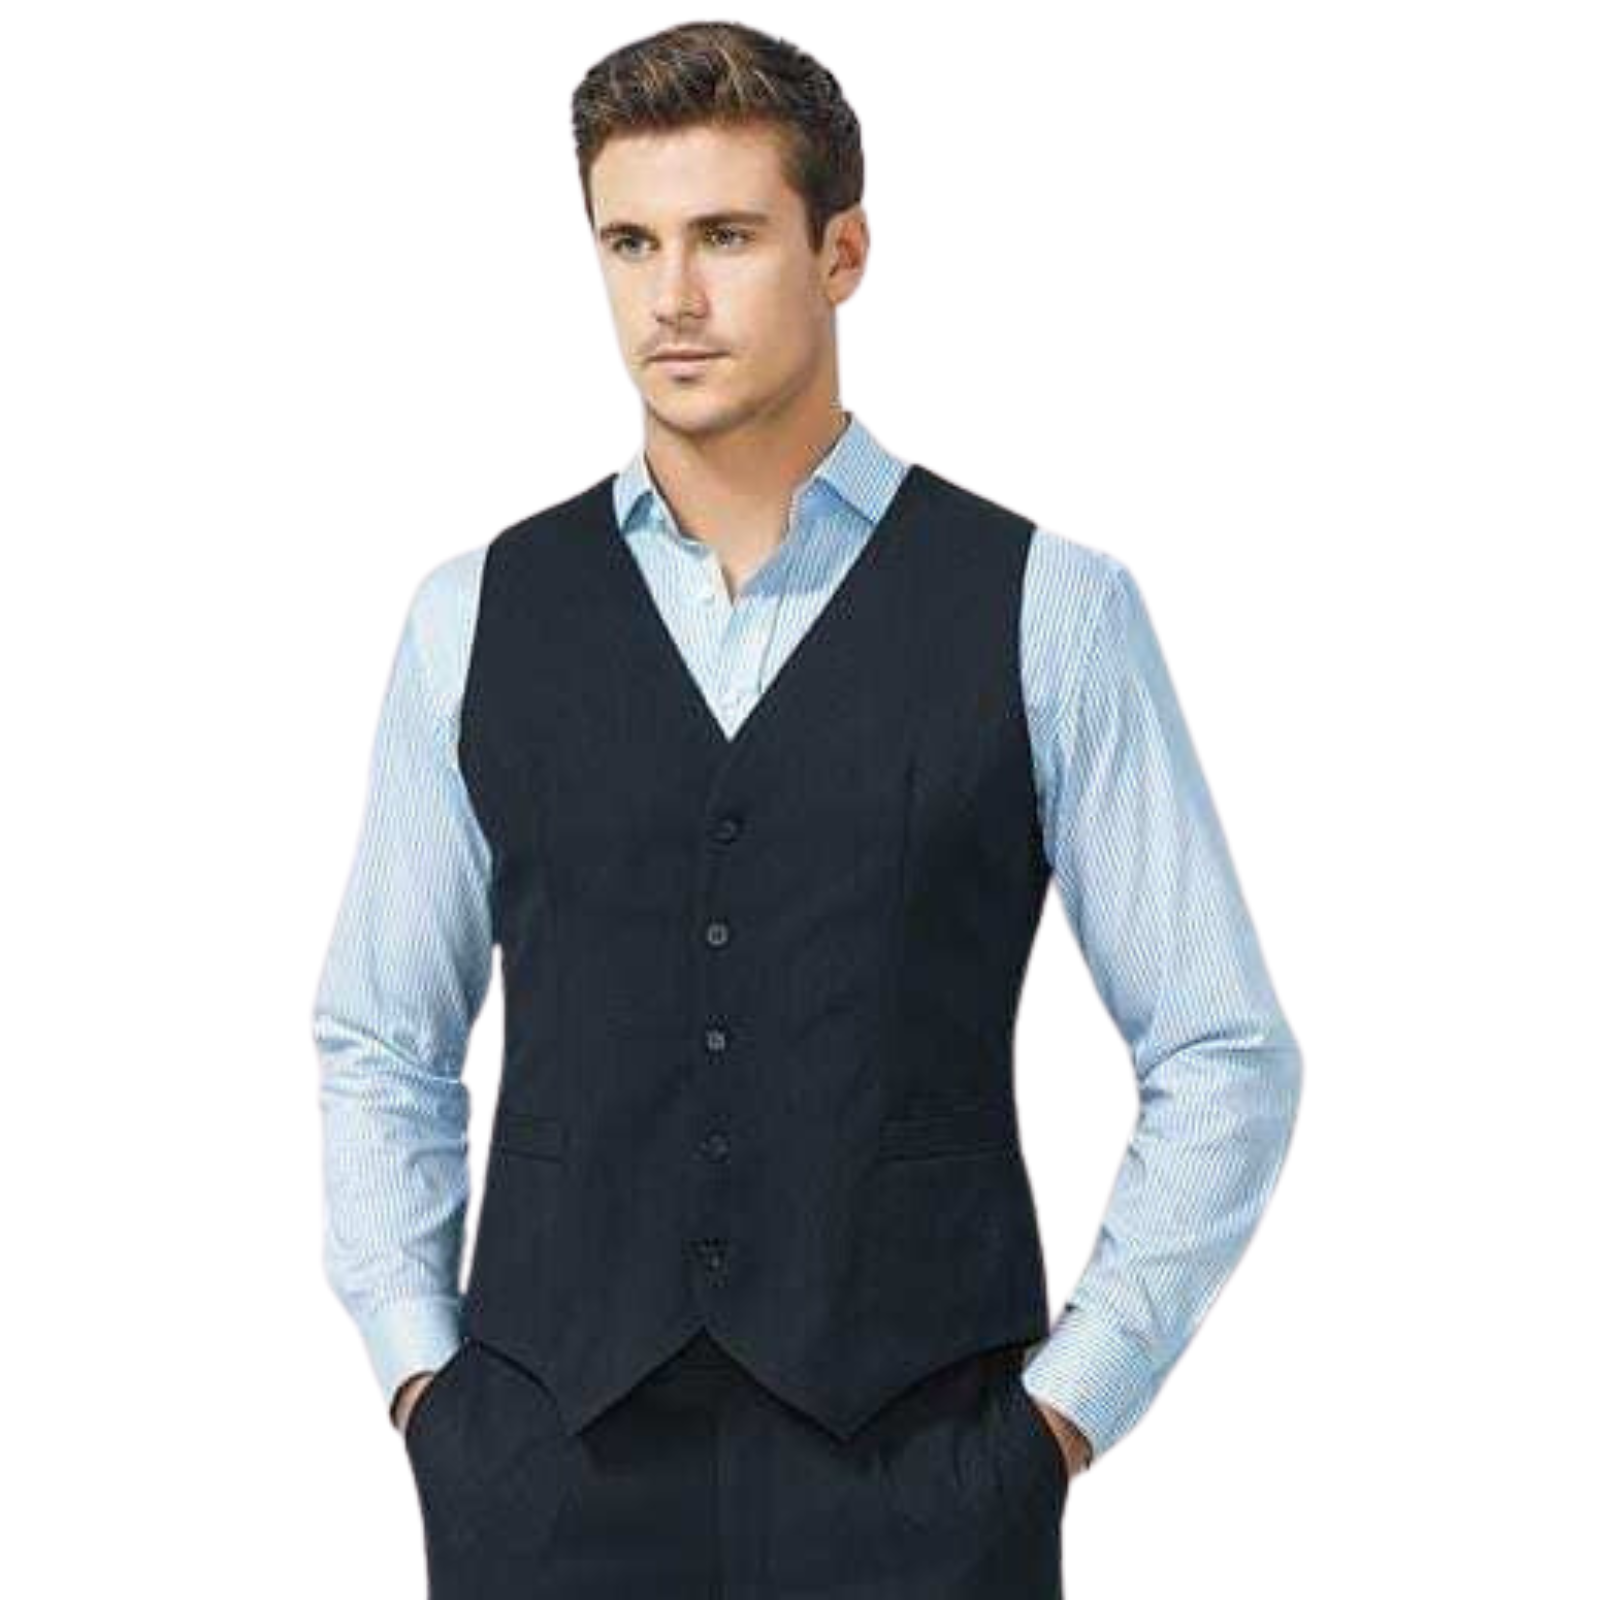 Mens Peaked Vest Waistcoat w/ Knitted Back Suit Formal Wedding Dress Up - Navy - 97